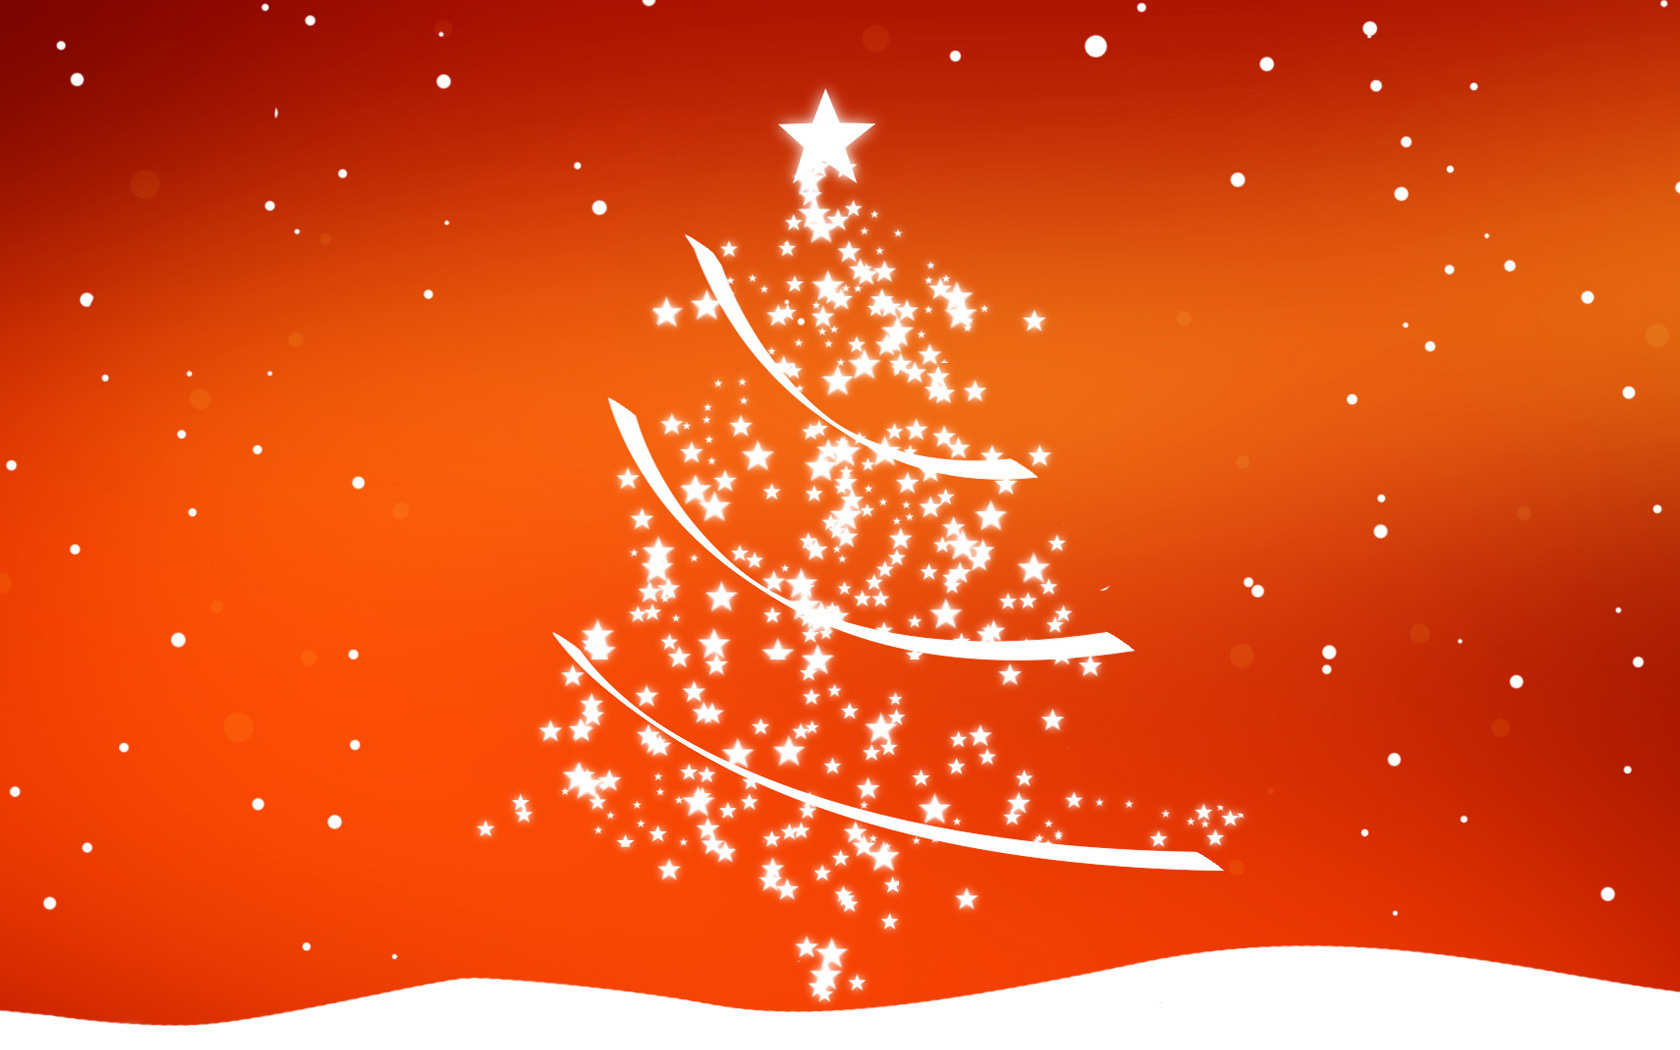 Christmas Themed Desktop Wallpaper Image Pictures Becuo